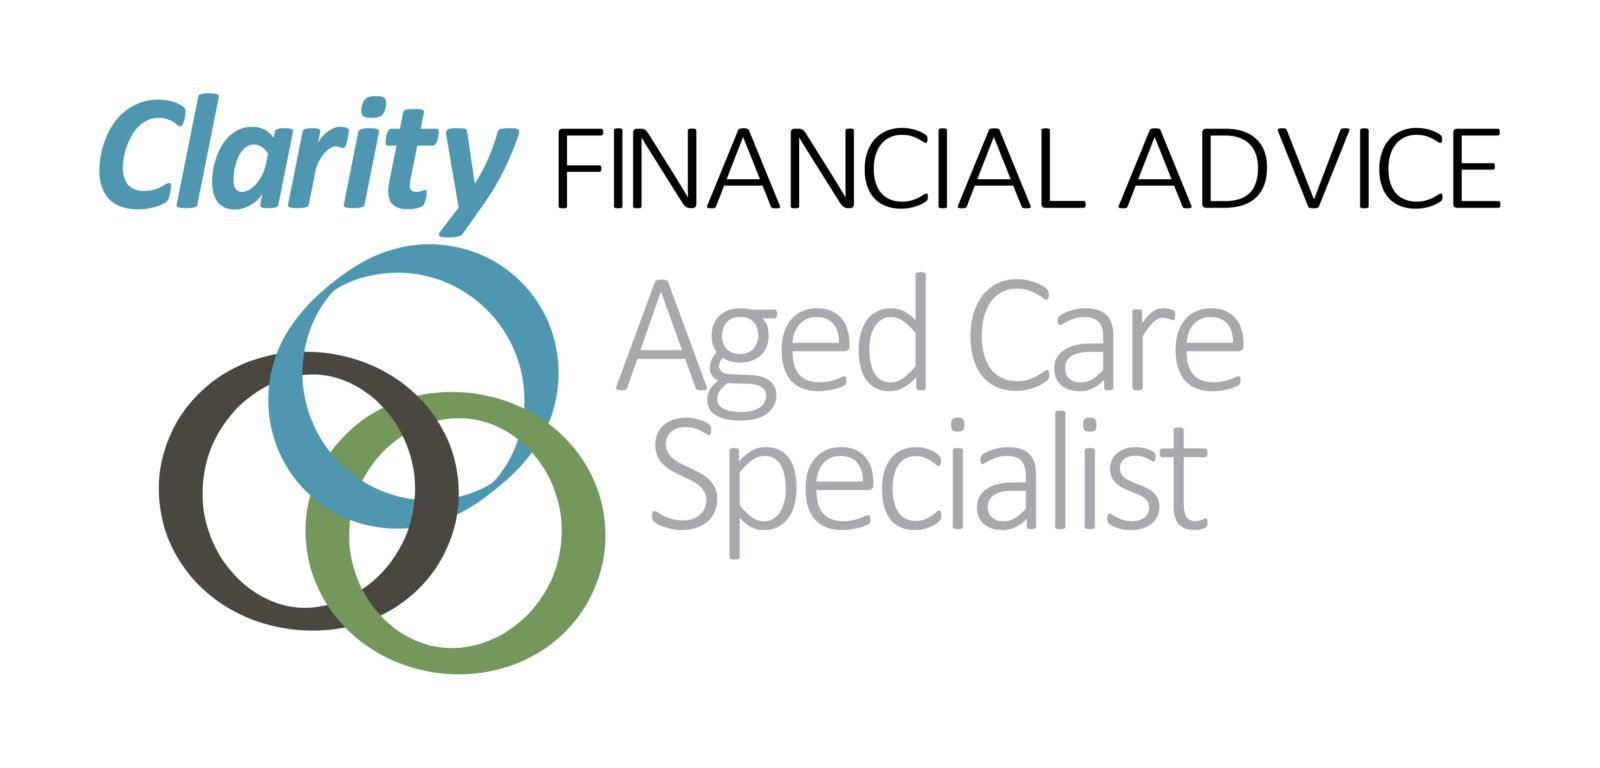 Explore our services and providers directory | Senior and Aged Care